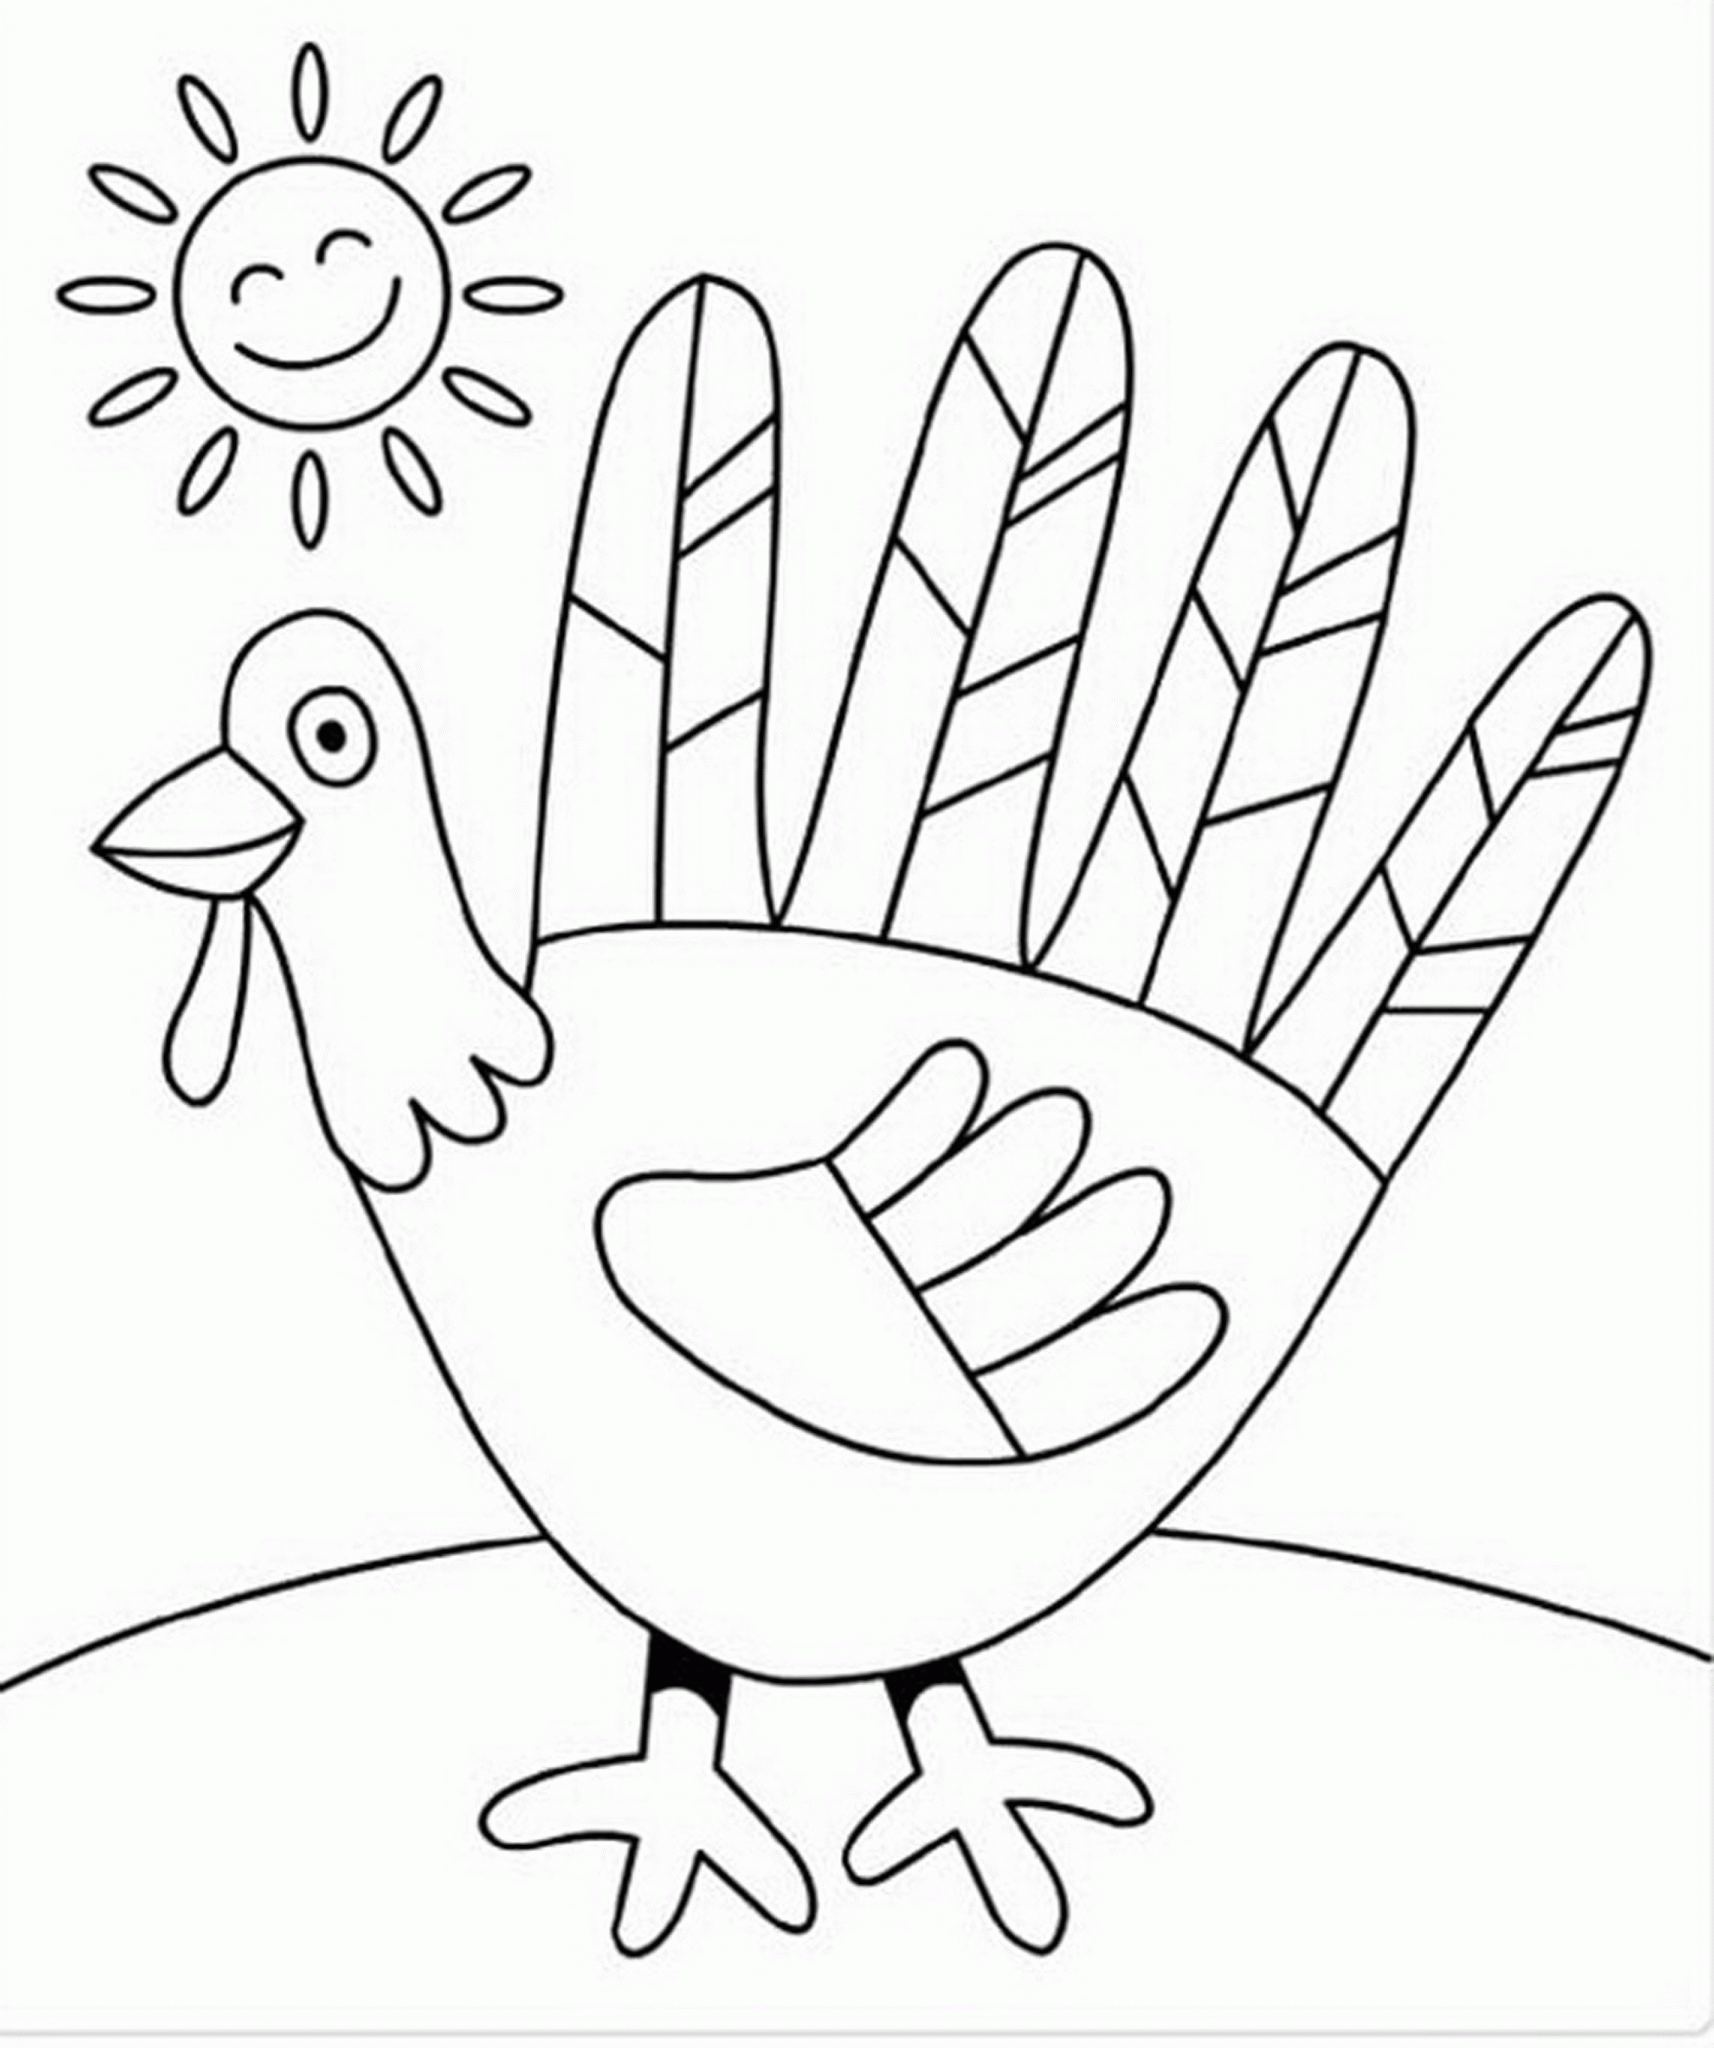 Download Thanksgiving Coloring Pages, Kids Love Drawing and Coloring